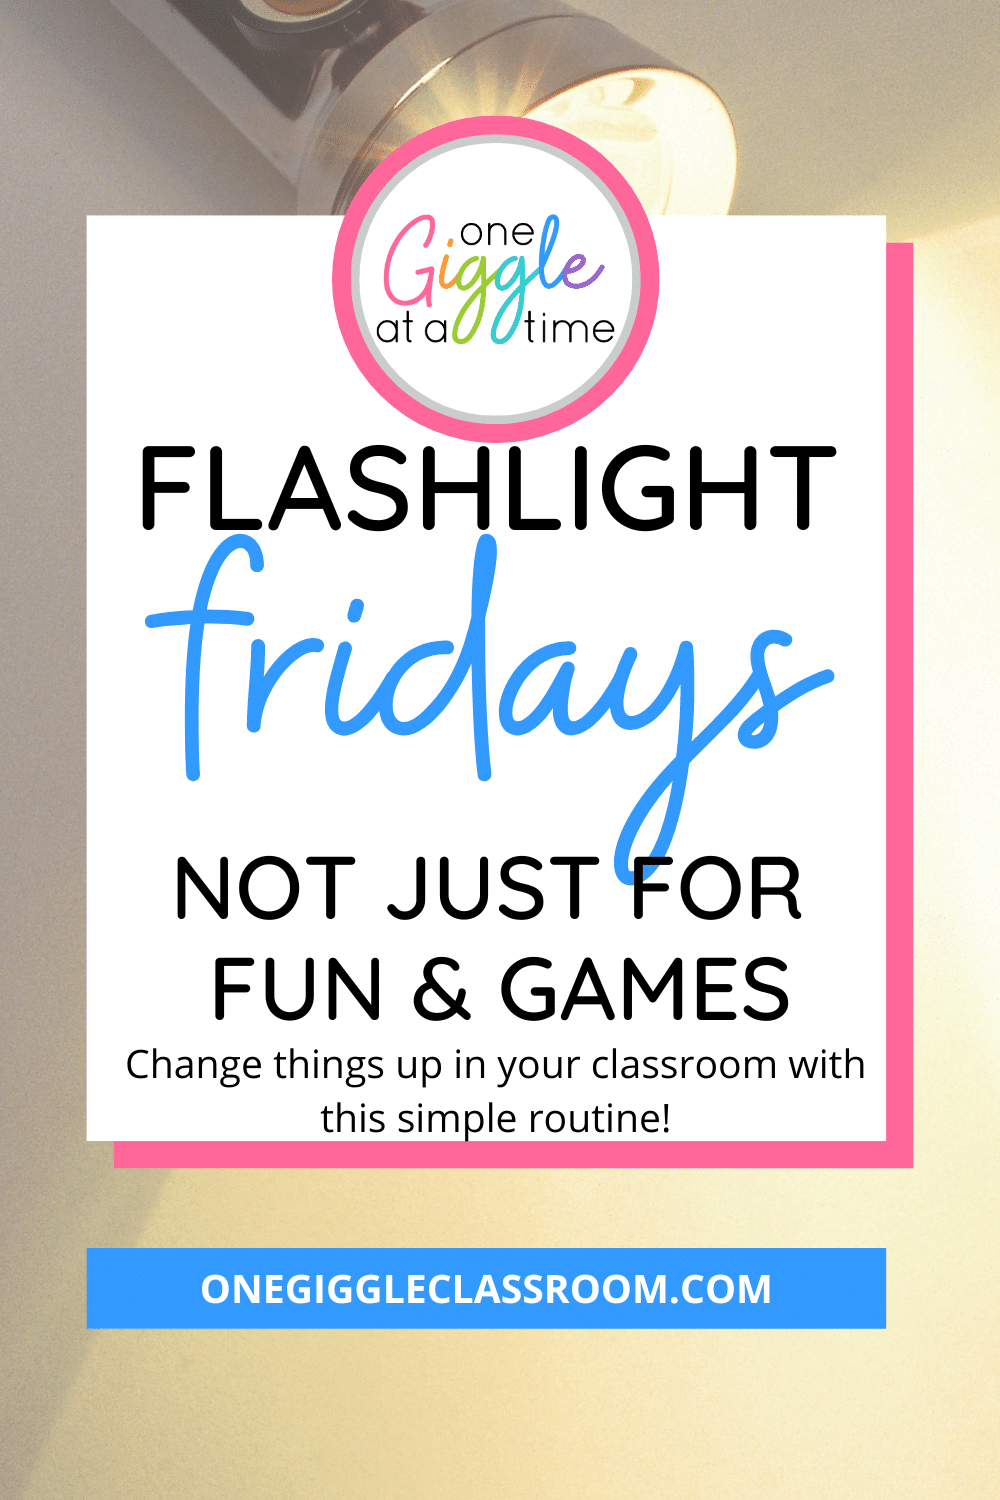 Flashlight FridaysNot Just For Fun and Games! - One Giggle At A Time